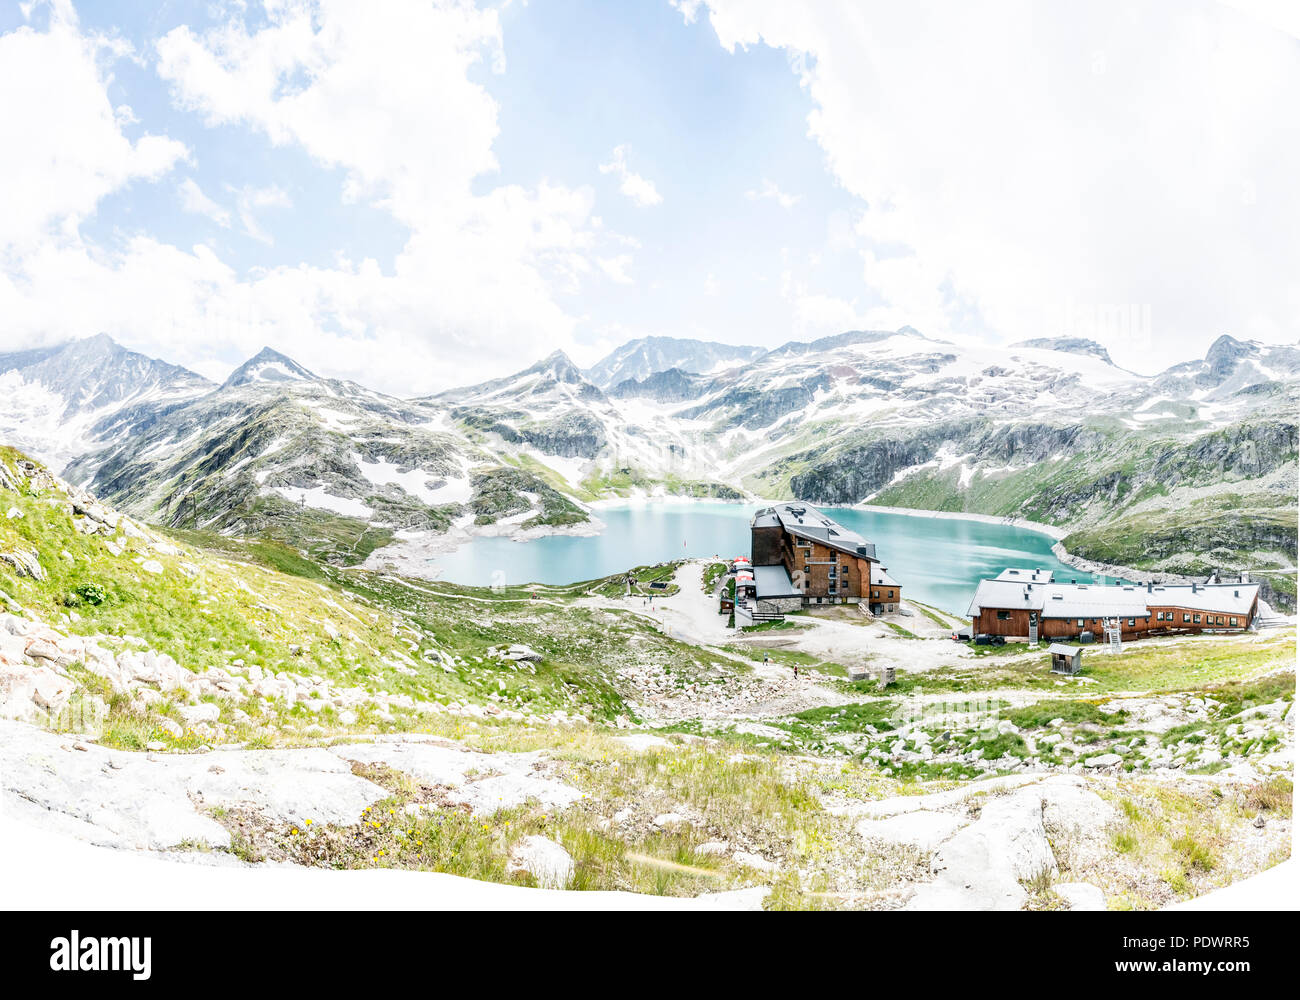 Rudolfs Hut Berg Hotel in the Granats Group of mountains near Zell am See in Austria Stock Photo